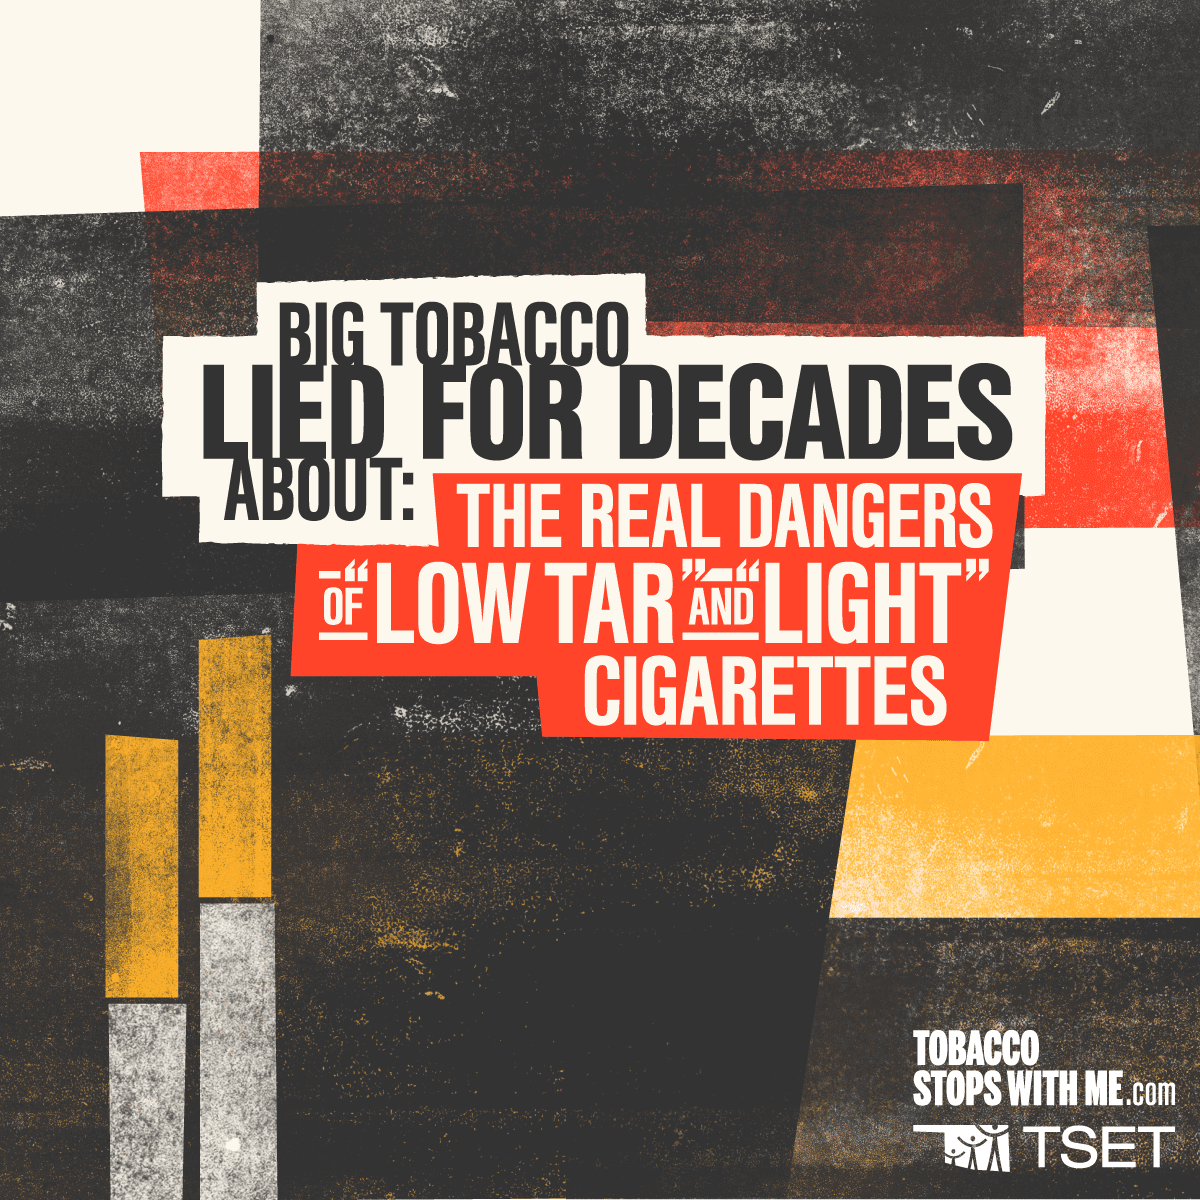 Big tobacco lied for decades about: the real dangers of low tar and light cigarettes